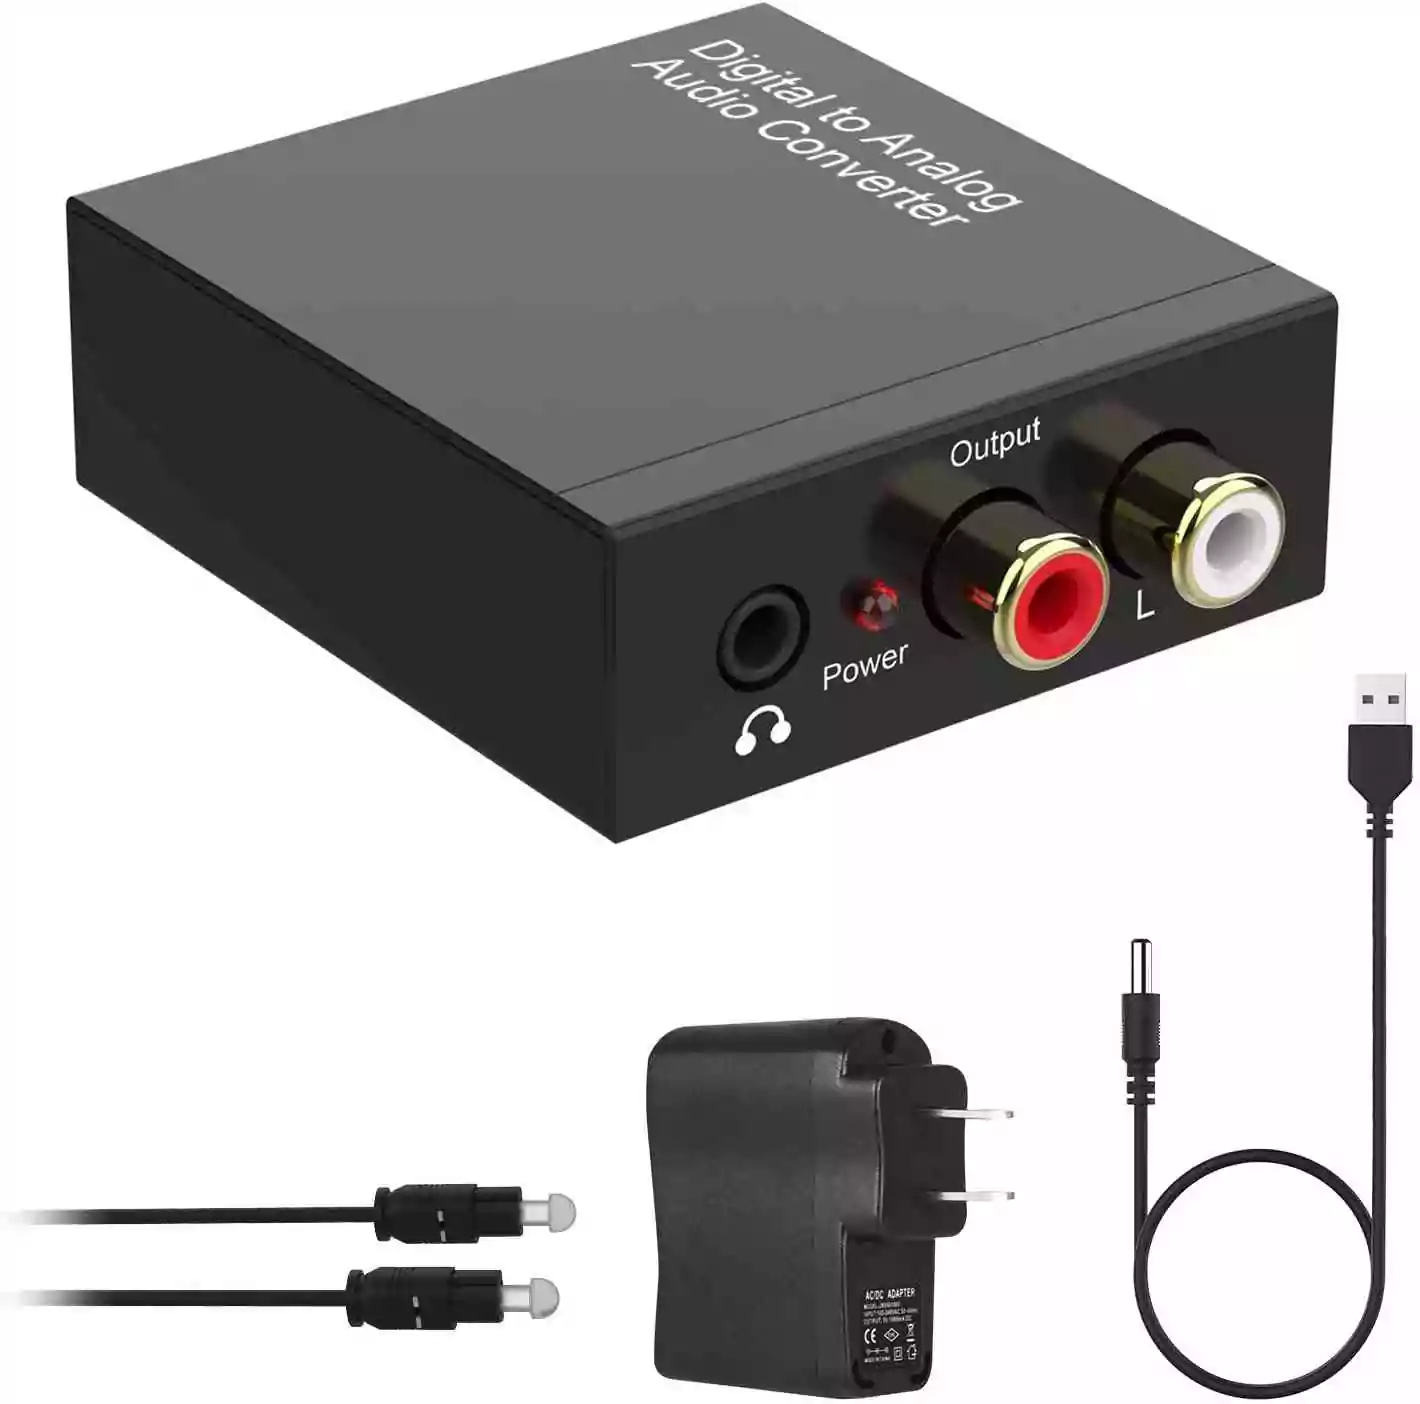 192KHz Analog Audio Converter DAC SPDIF Coaxial Optical Convert to L/R RCA, Toslink Optical to 3.5mm Jack Audio Adapter for PS4 HD DVD Home Cinema Systems